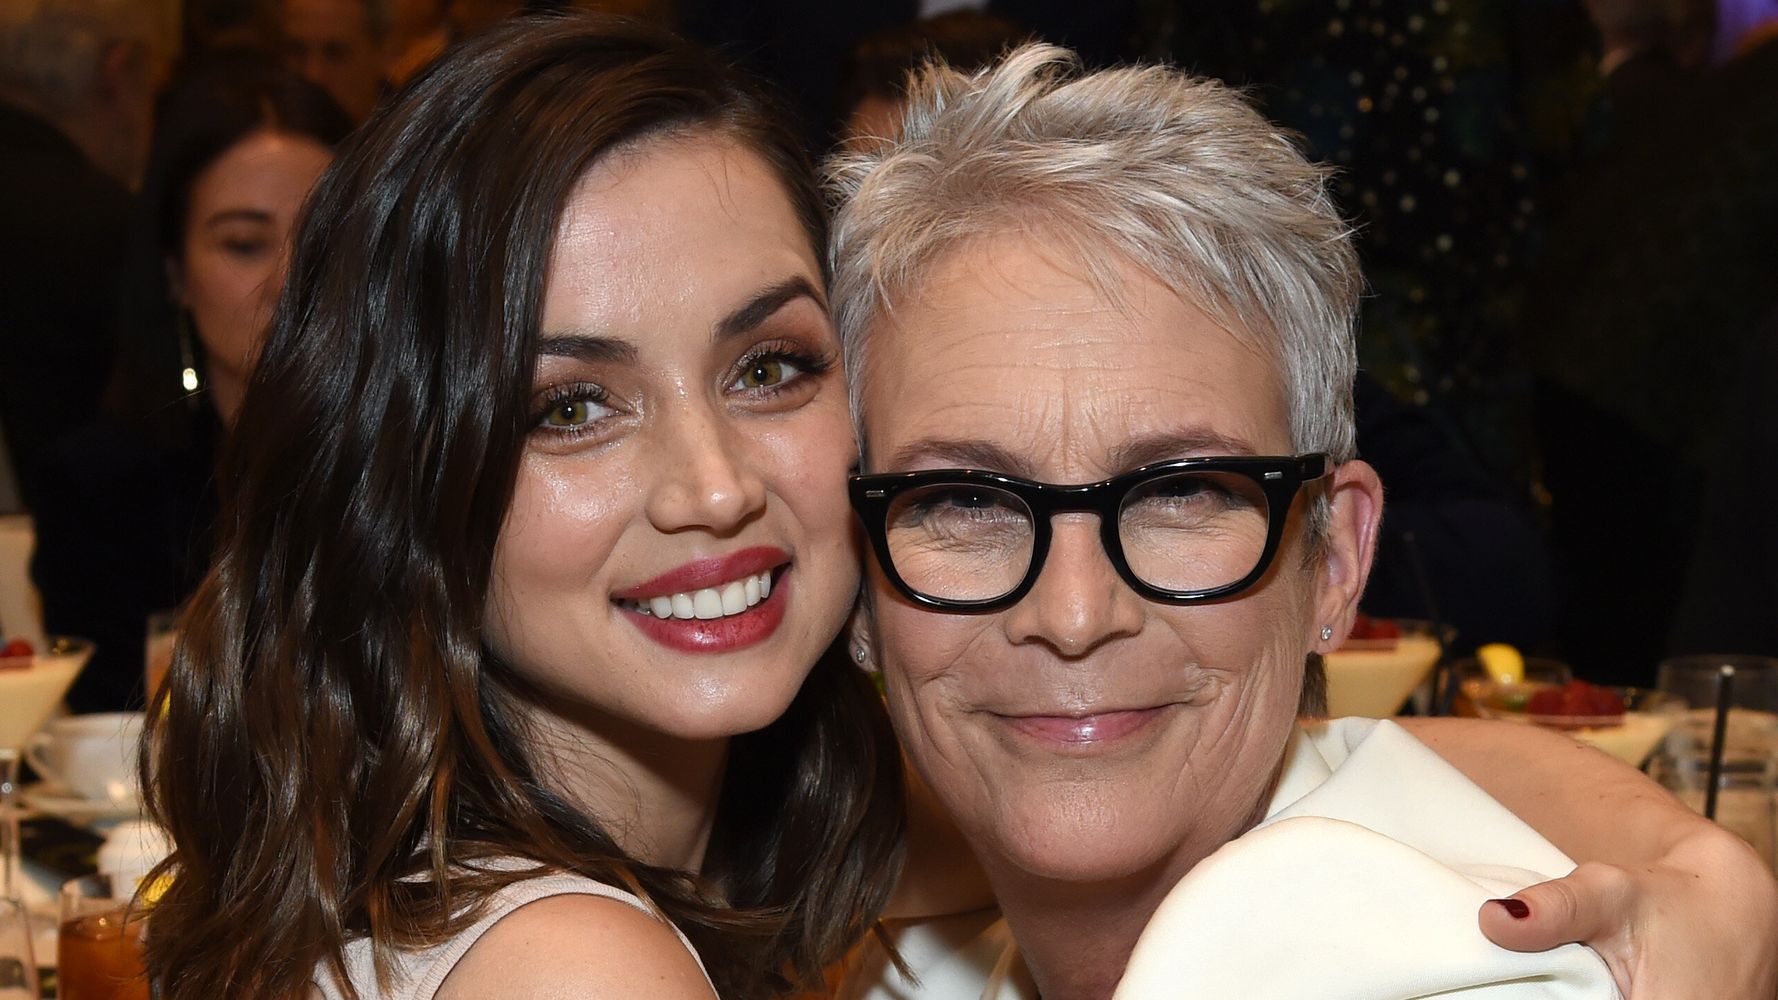 Jamie Lee Curtis ‘Assumed’ Ana De Armas Was ‘Unsophisticated’ When They First Met